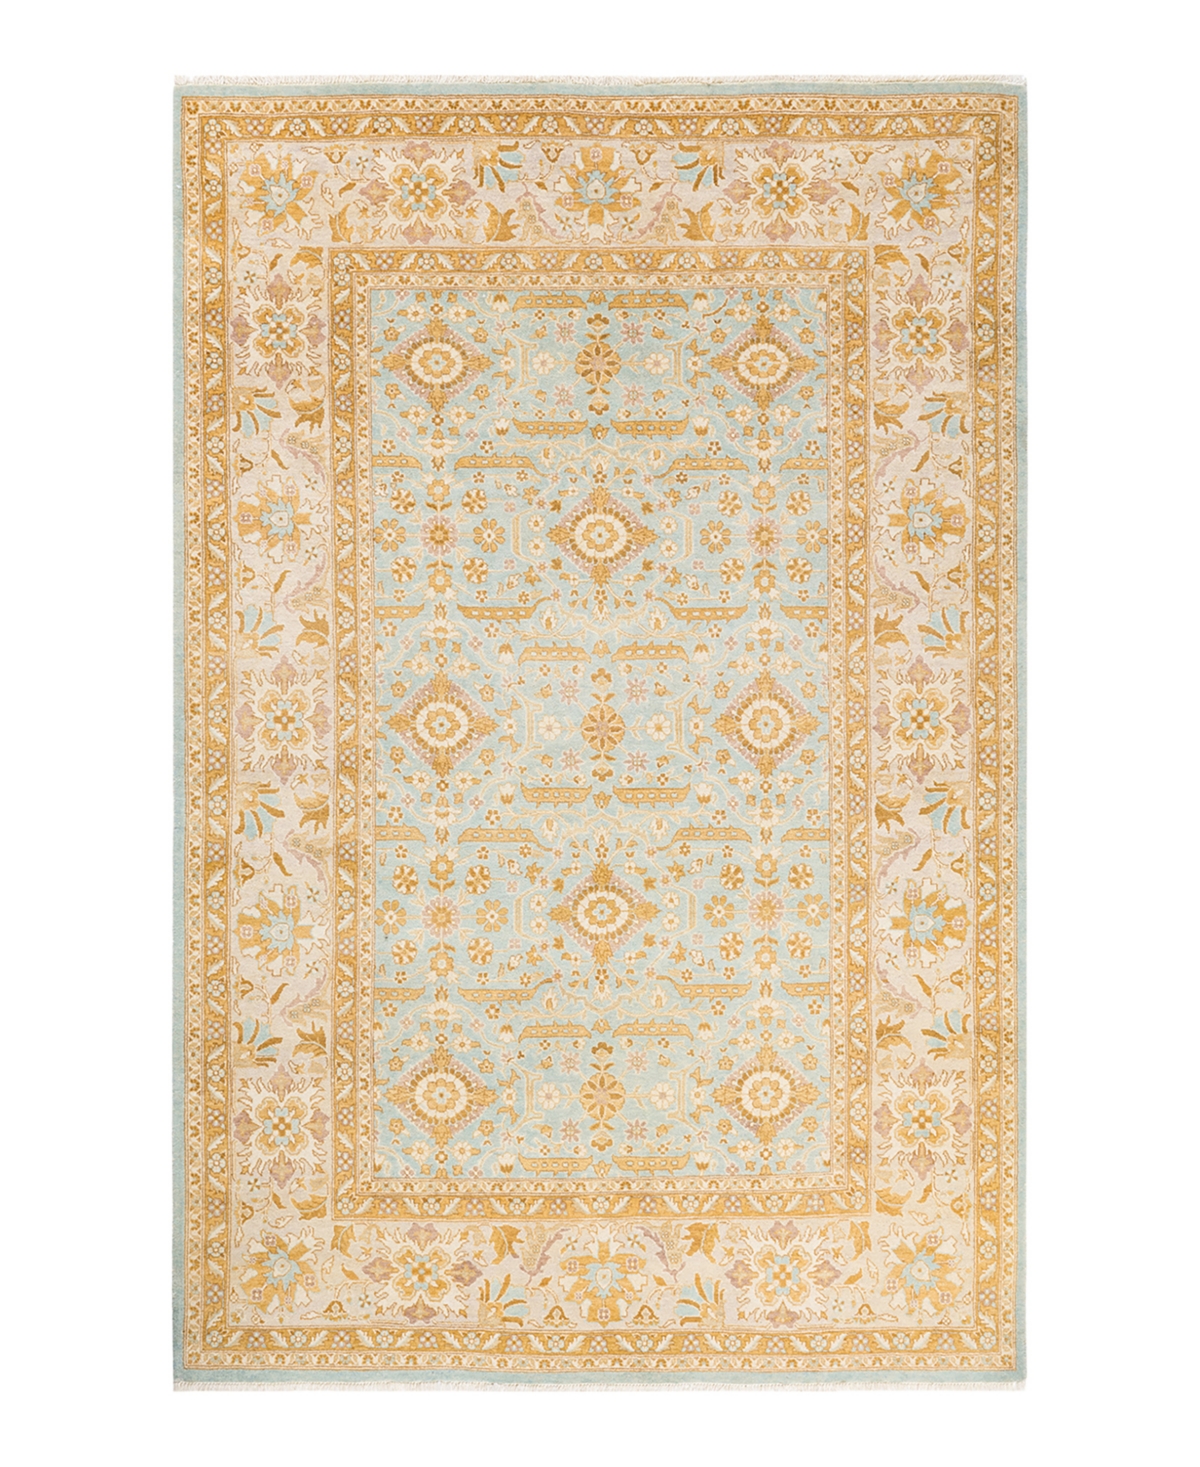 Closeout! Adorn Hand Woven Rugs Eclectic M1457 5'10in x 9'3in Area Rug - Mist